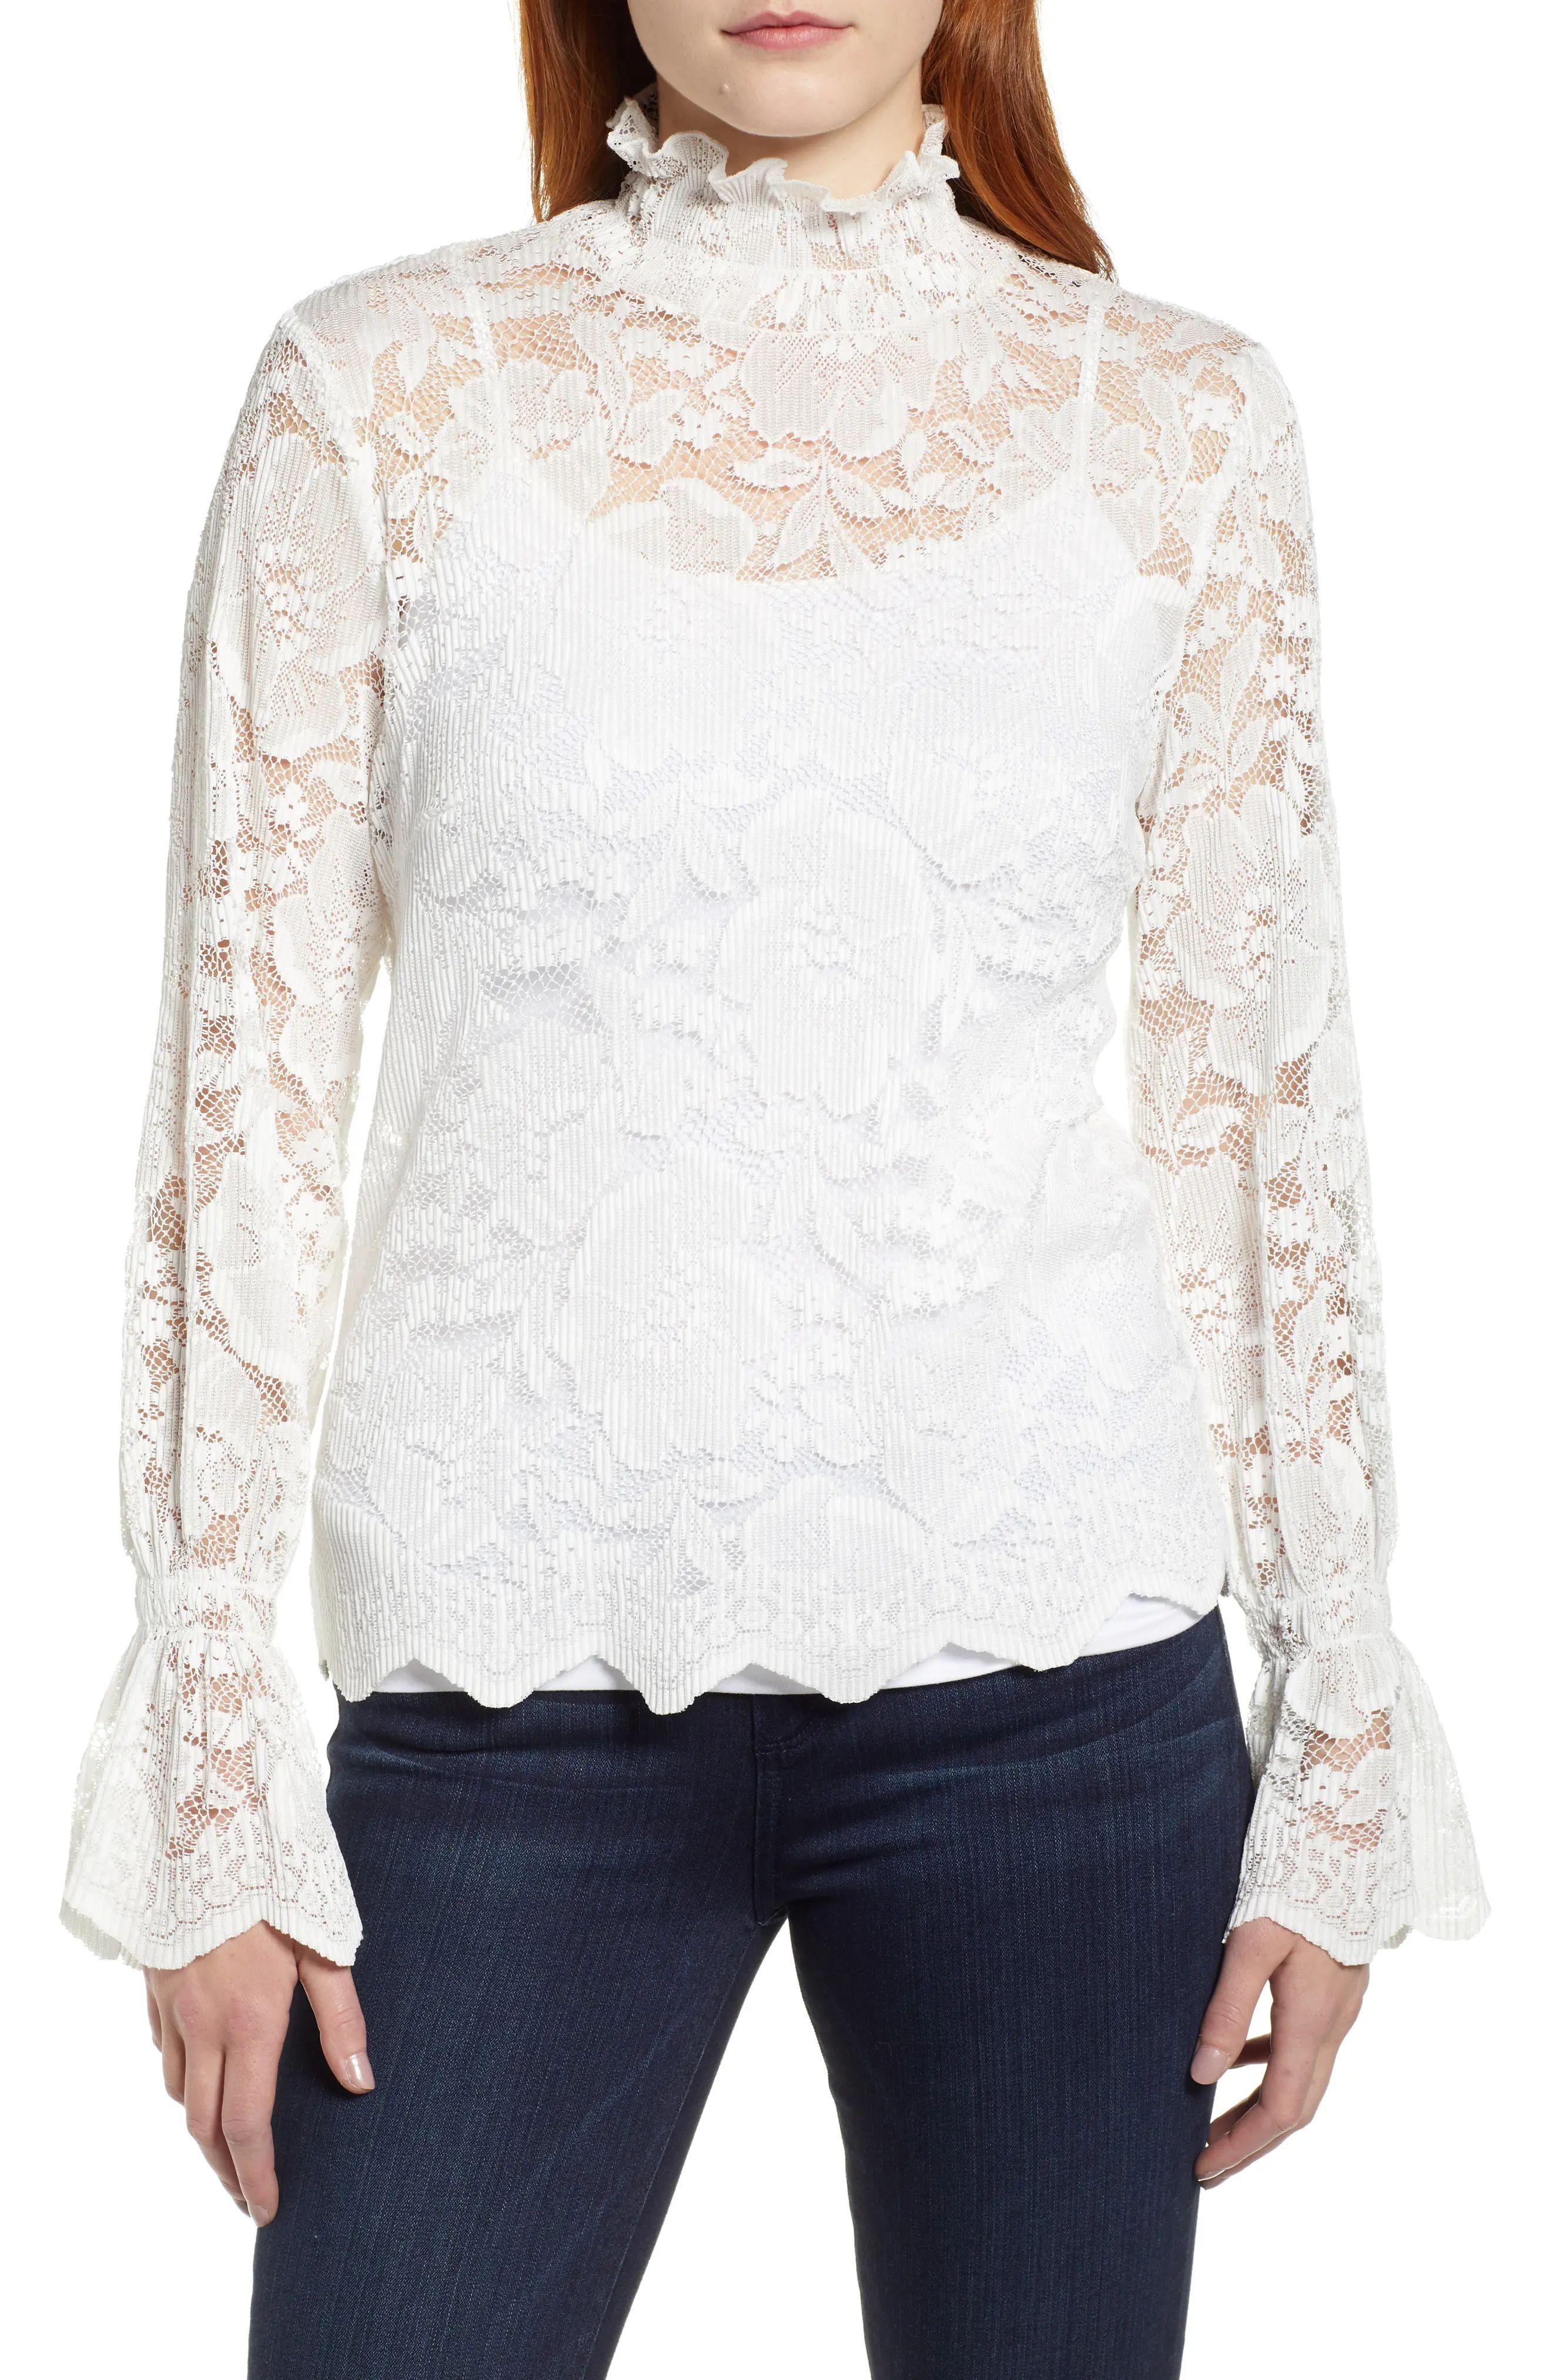 Everleigh Stretch Lace Top | Nordstrom